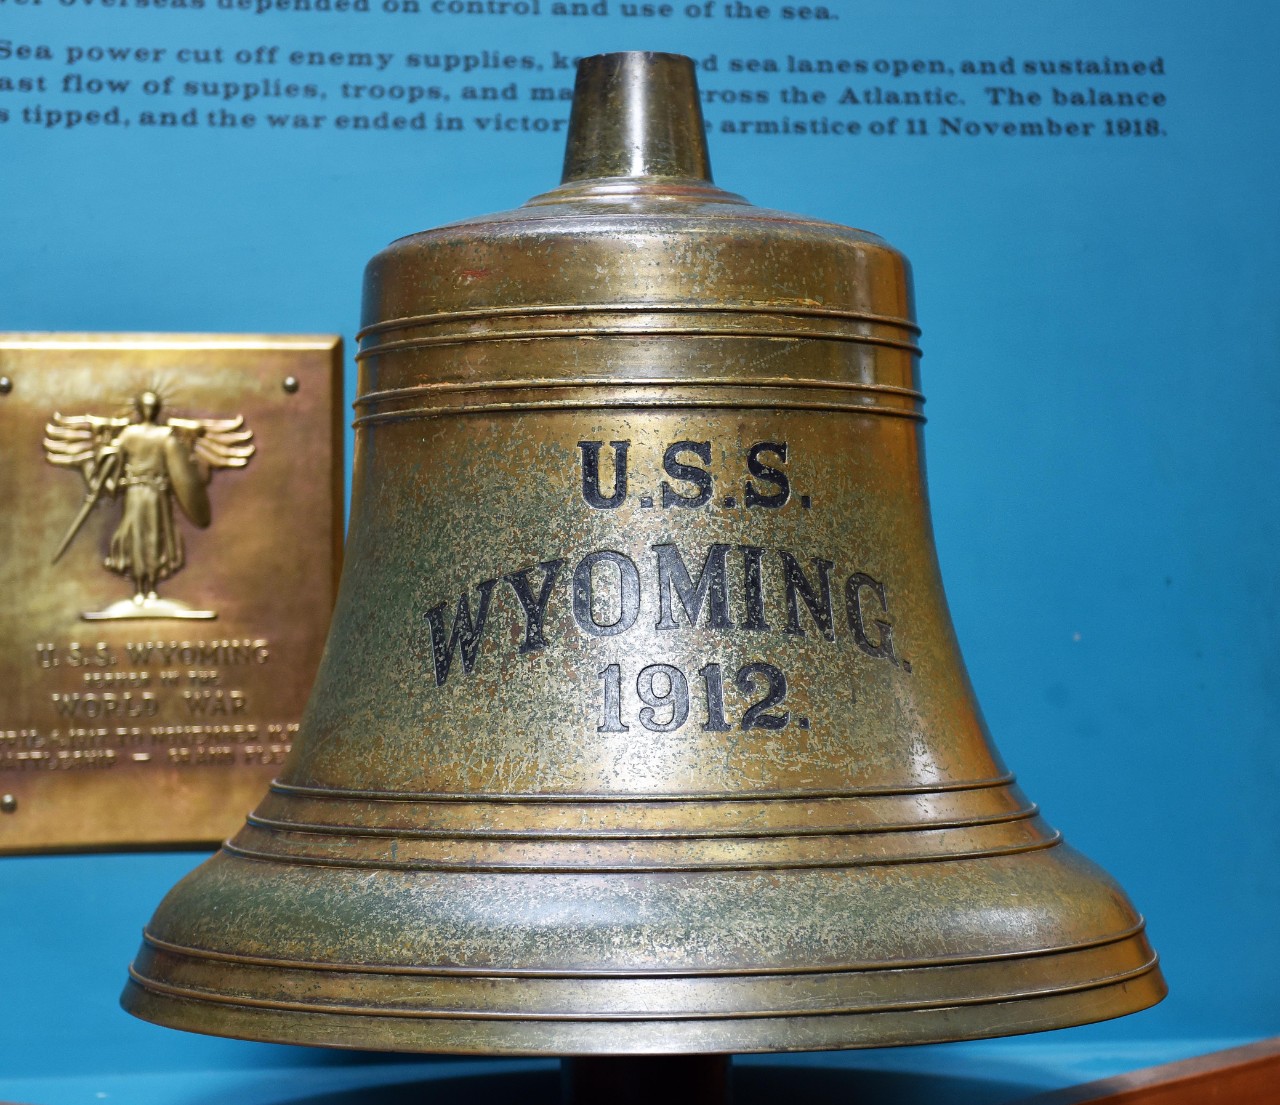 NMUSN-5136: USS Wyoming (BB-32), Ship’s Bell, late 2010s. Bell on display in the World War I exhibit area. Official U.S. National Museum of the U.S. Navy Photograph. Digital only.